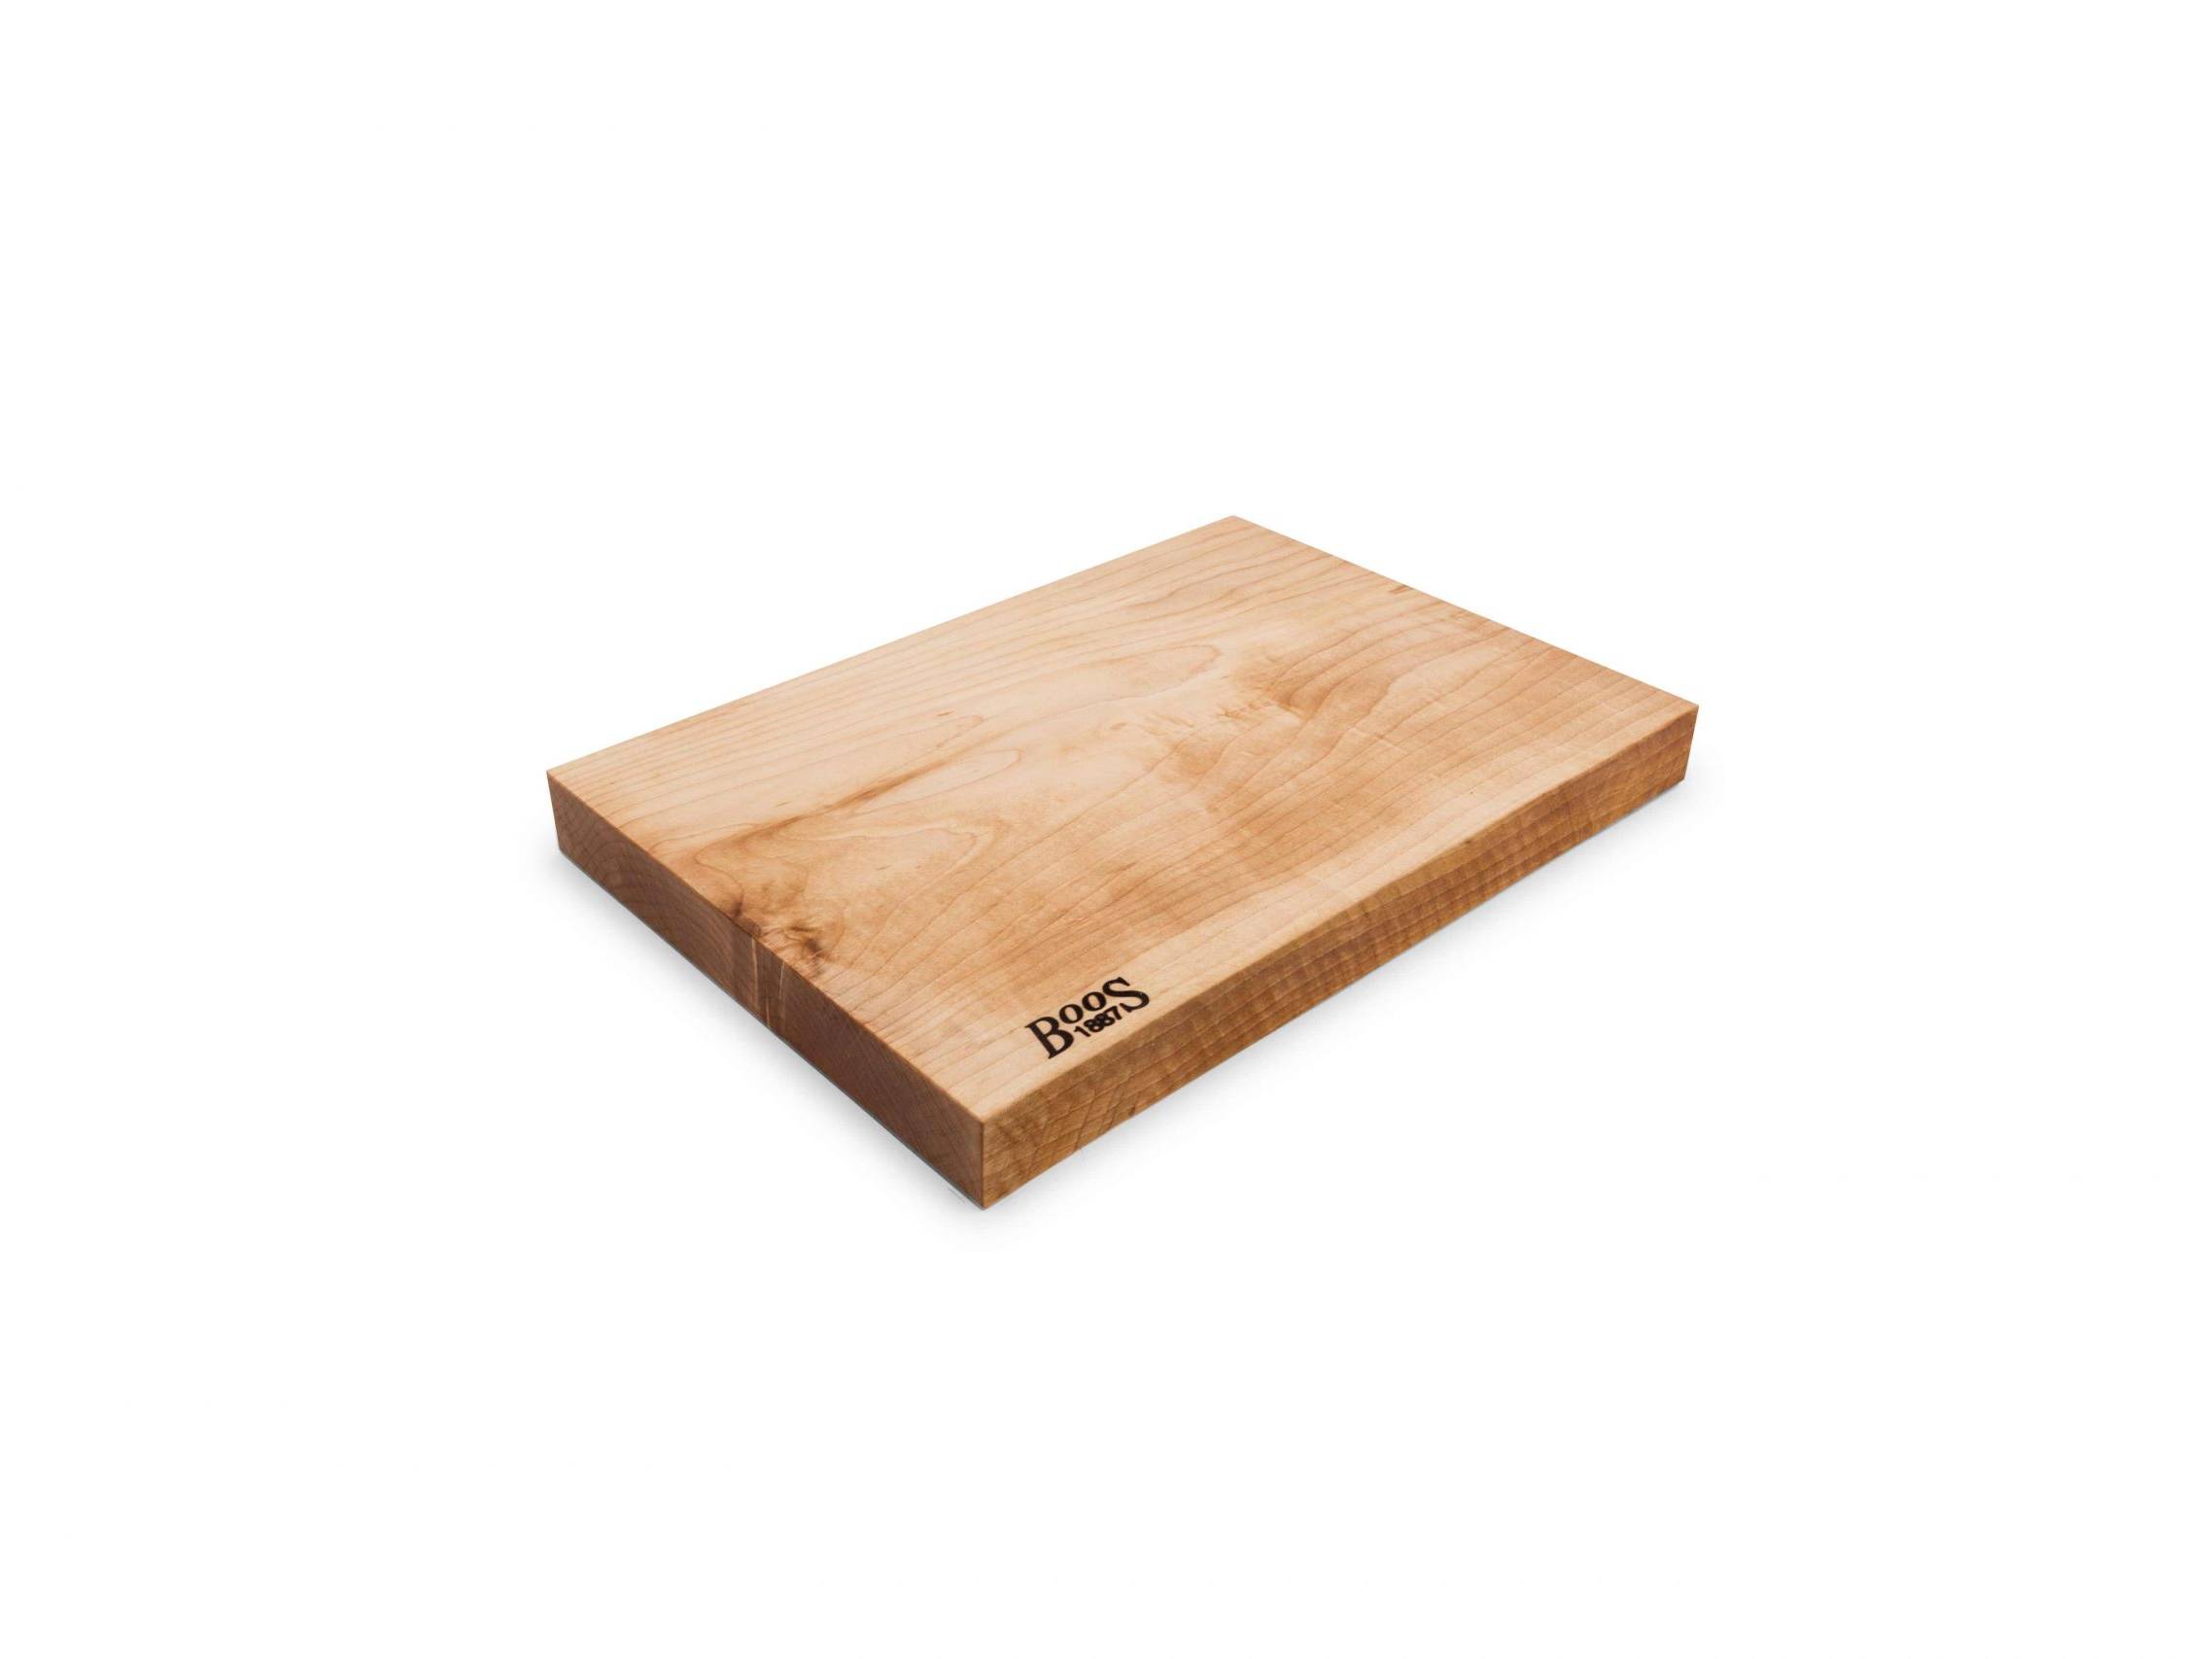 Boos 1887 / Rustic Edge one piece cutting board; hard maple; can be used on both sides 73